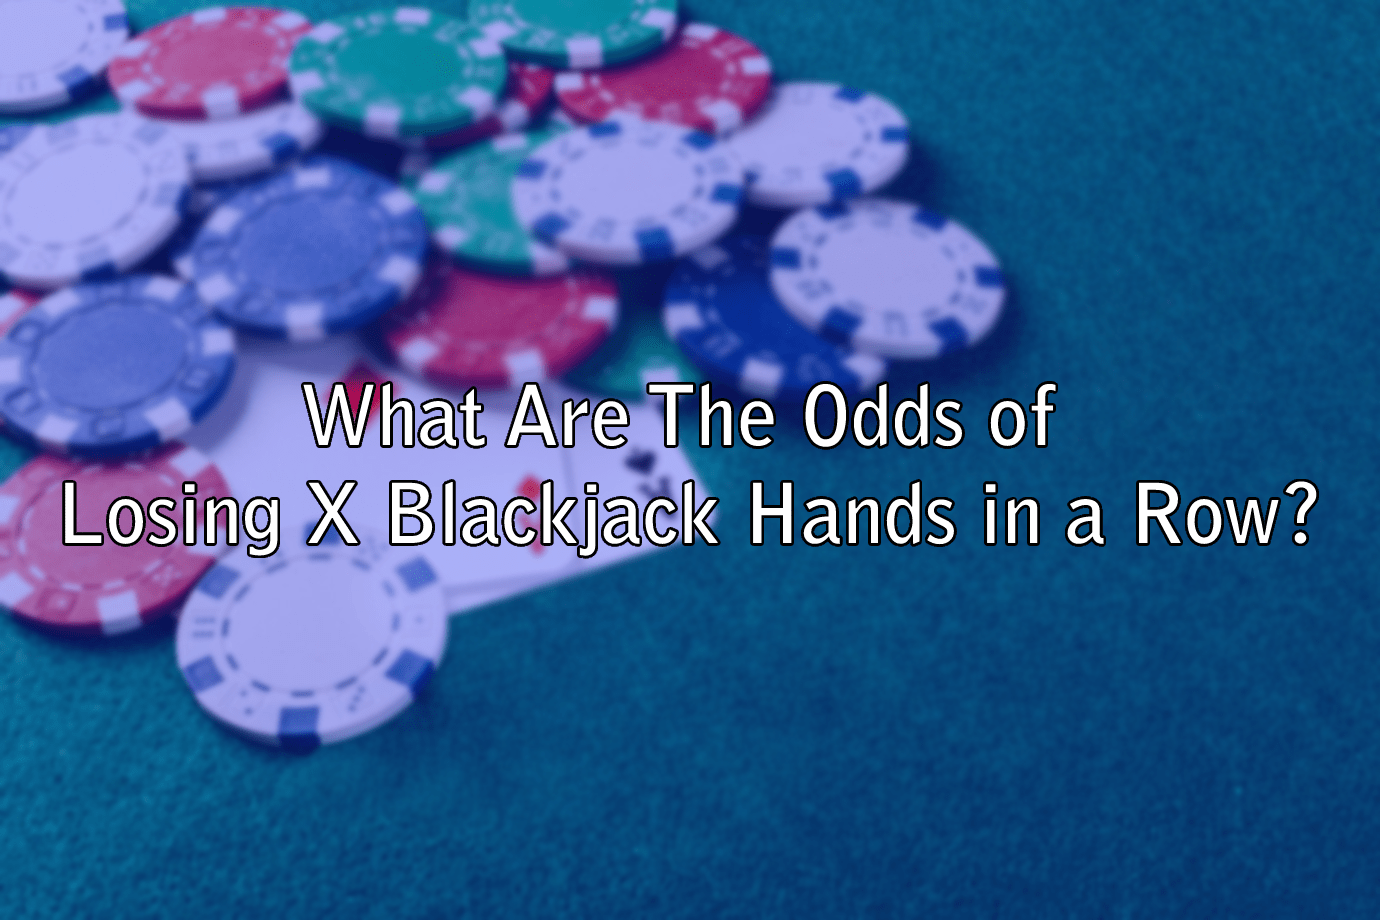 What Are The Odds of Losing X Blackjack Hands in a Row?